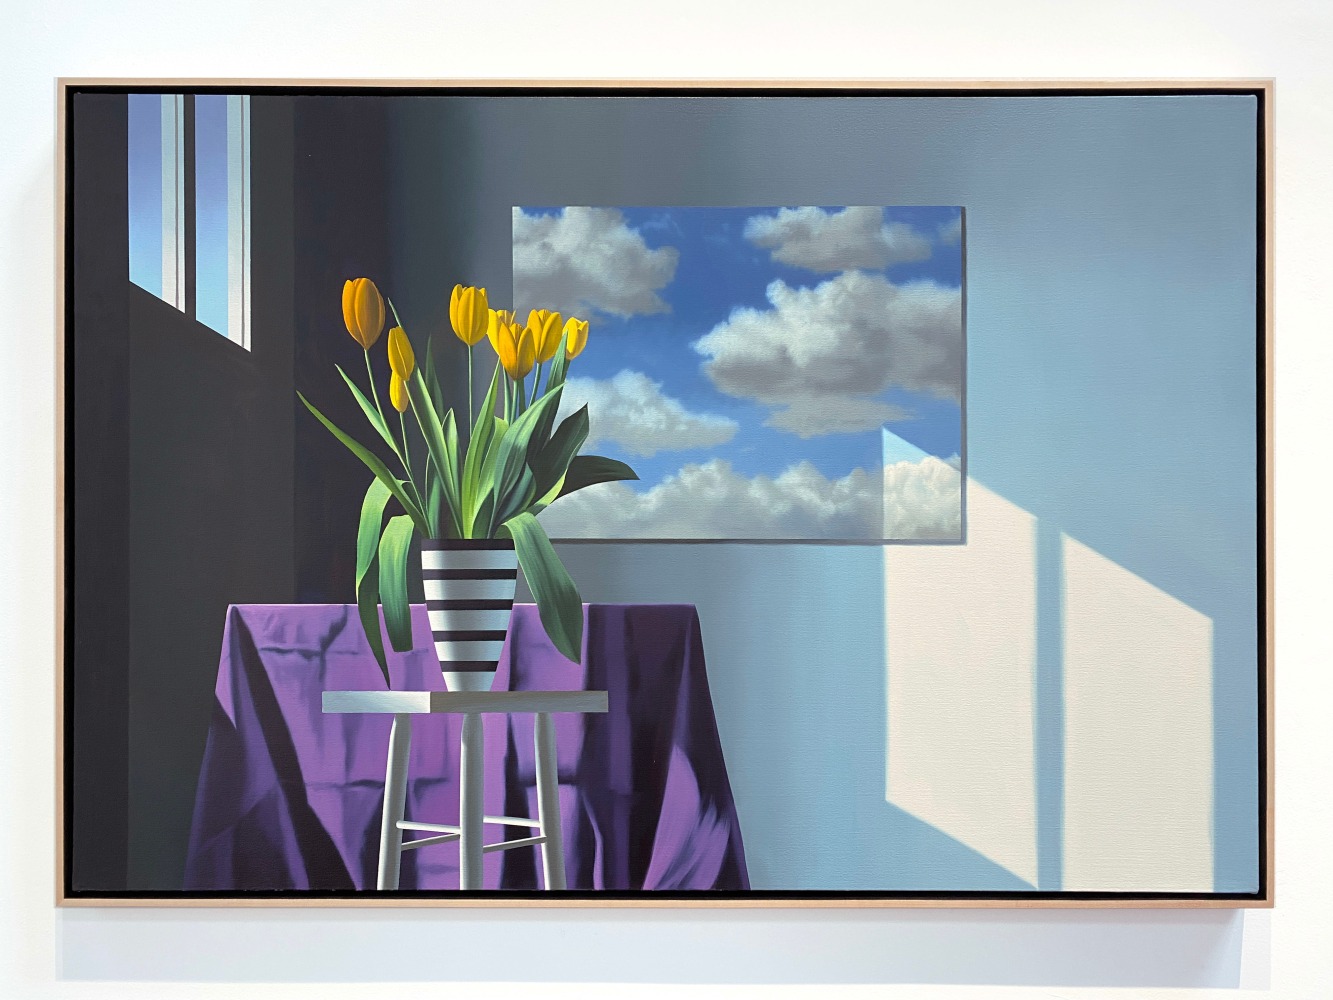 Interior with Yellow Tulips and Cloud Painting, 2021
Oil on canvas
36 x 54 inches
COH099